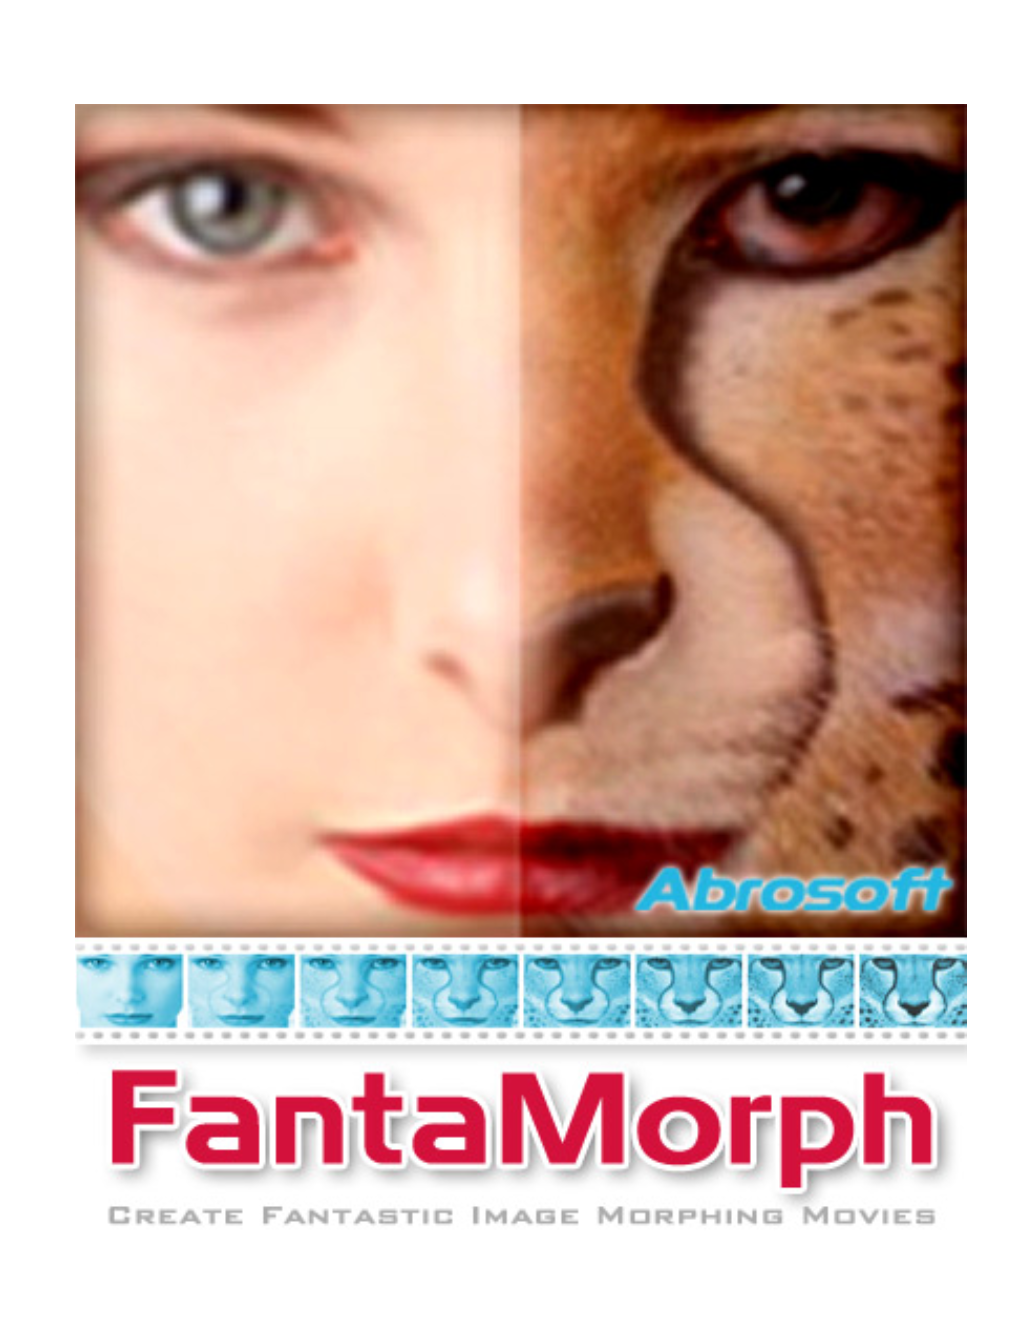 How to Morph More Than Two Images